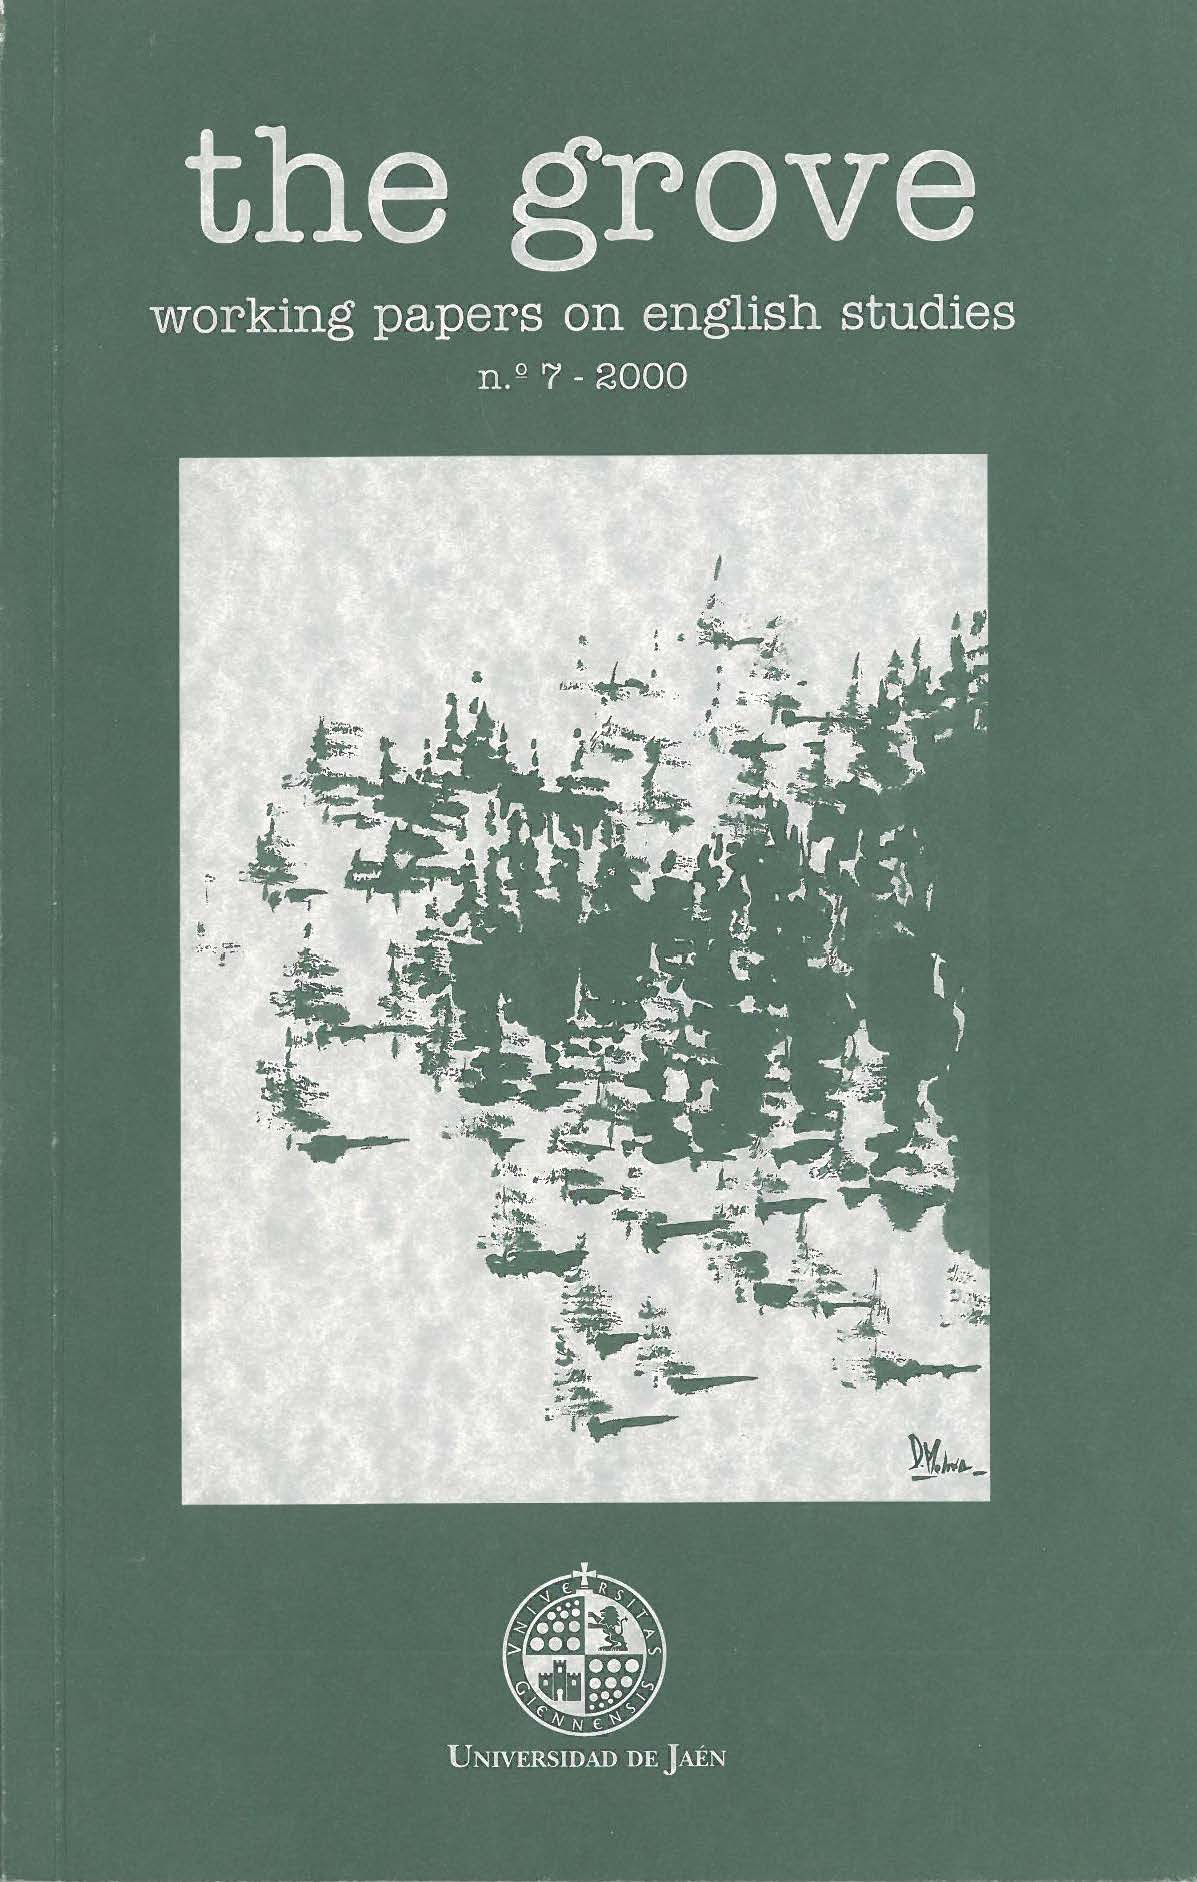 					View Vol. 7 (2000): The Grove. Working Papers on english studies
				